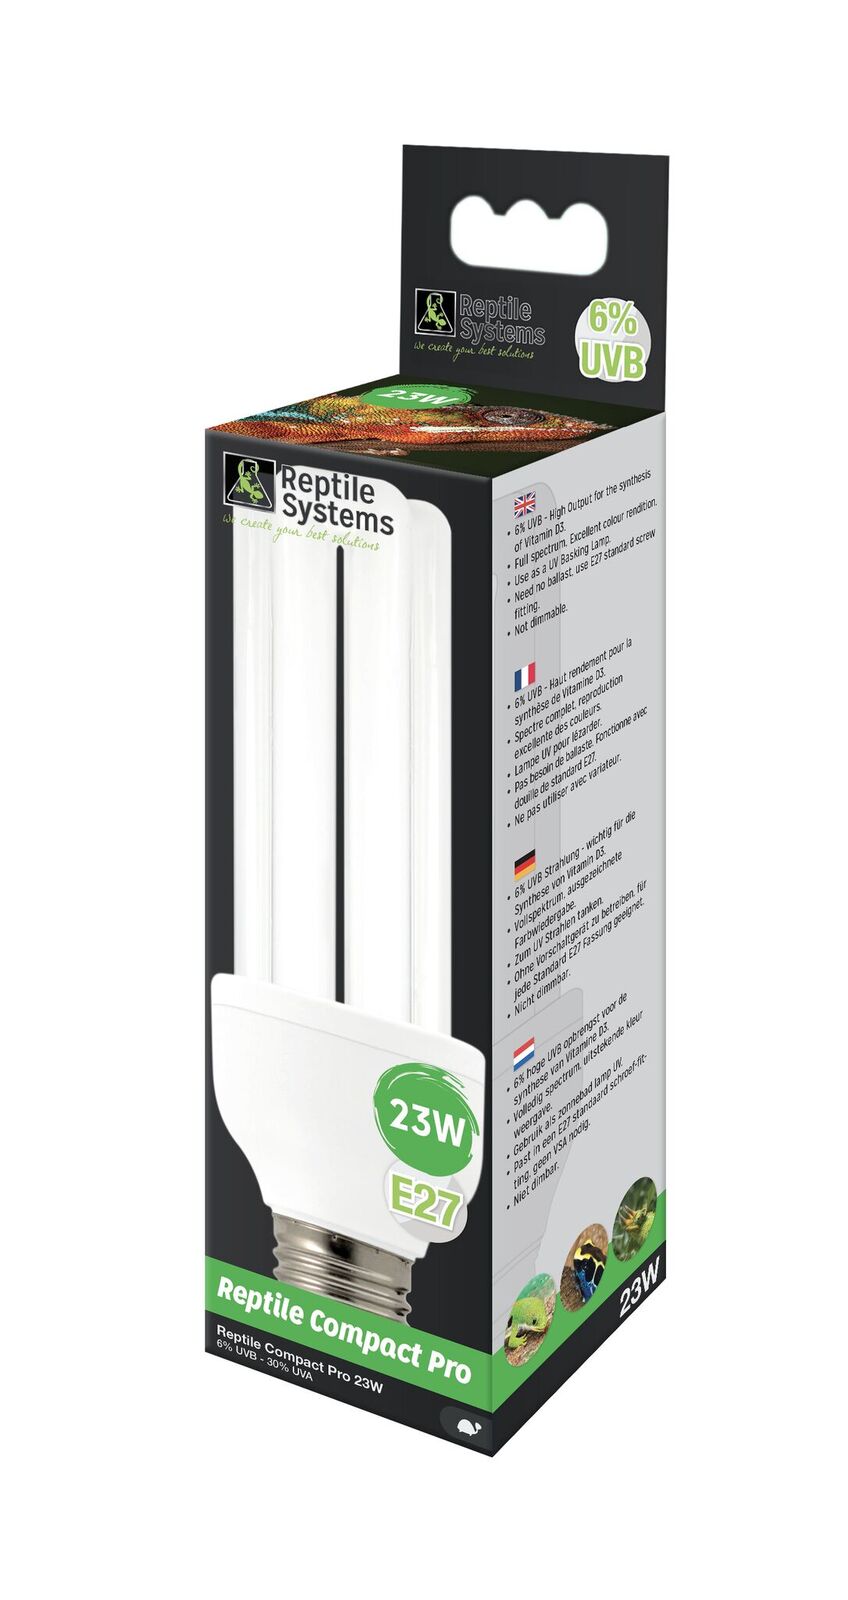 Reptile Systems Compact Lamp Pro - D3 6% UVB - 23w